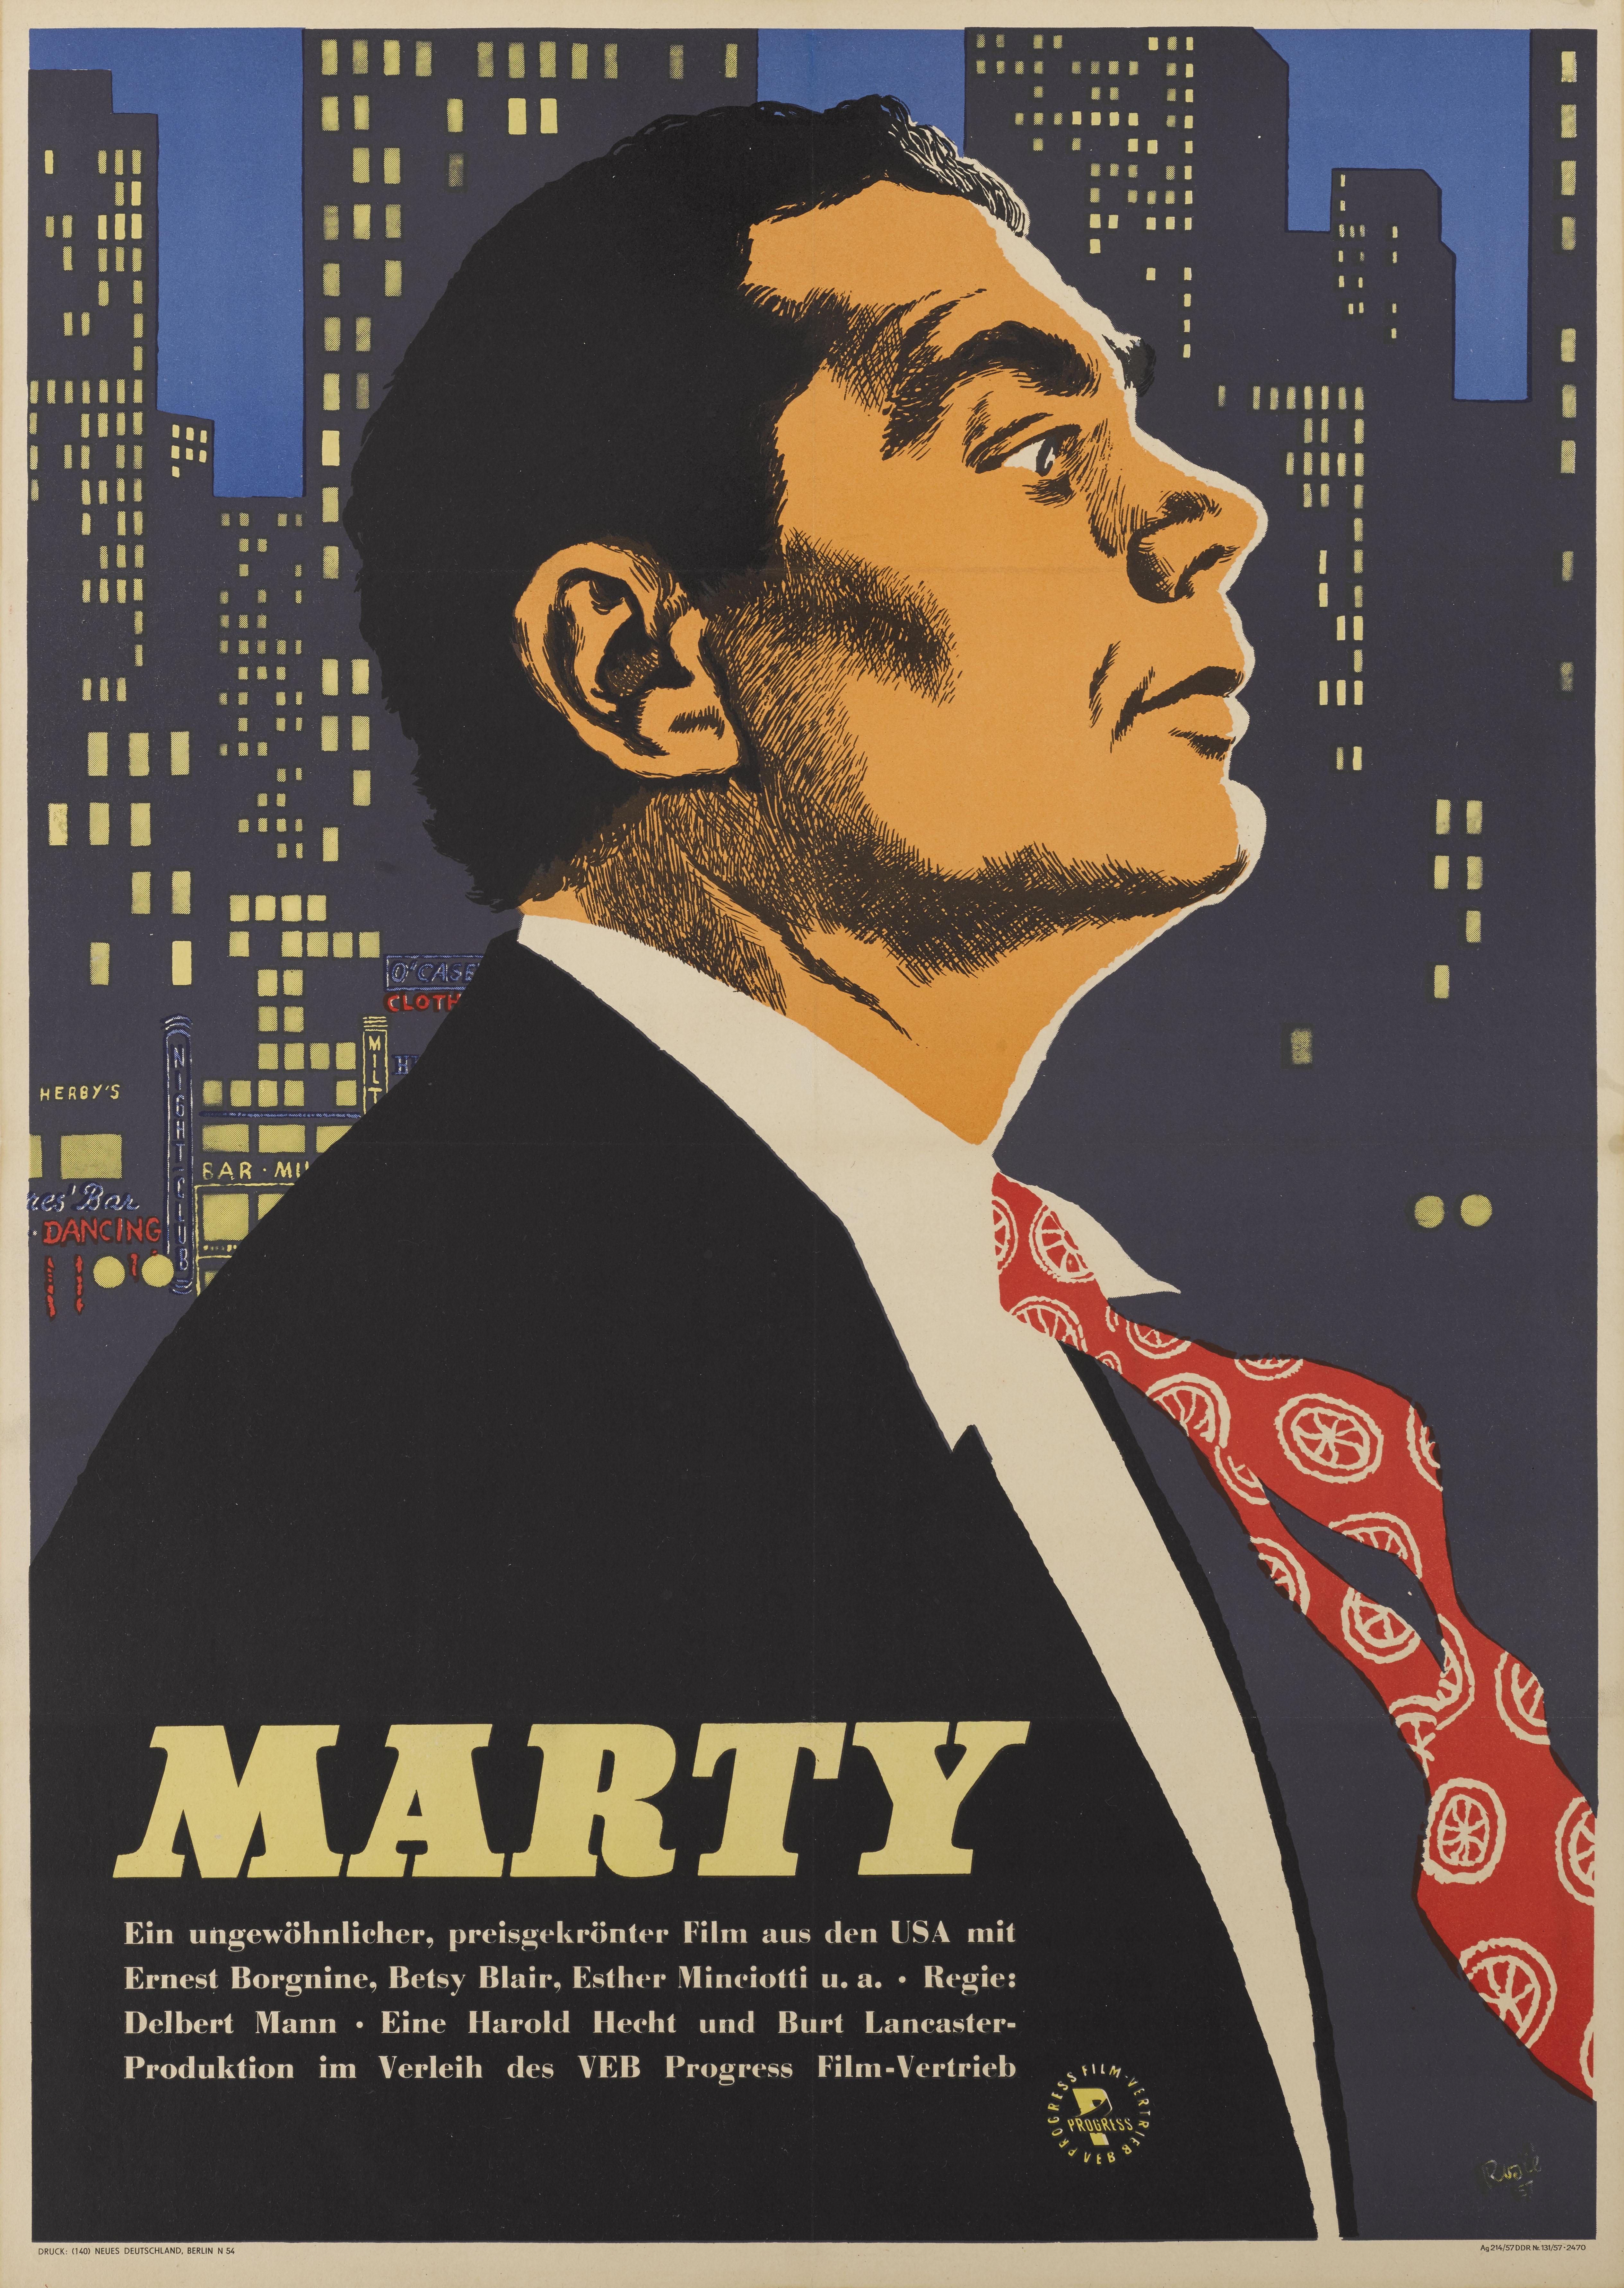 Original East German film poster for the 1955 drama romance Marty.
The film was directed by Delbert Mann and starred Ernest Borgnine and Betsy Blair.
This cool poster was designed for the films first East German release in 1957.
This poster